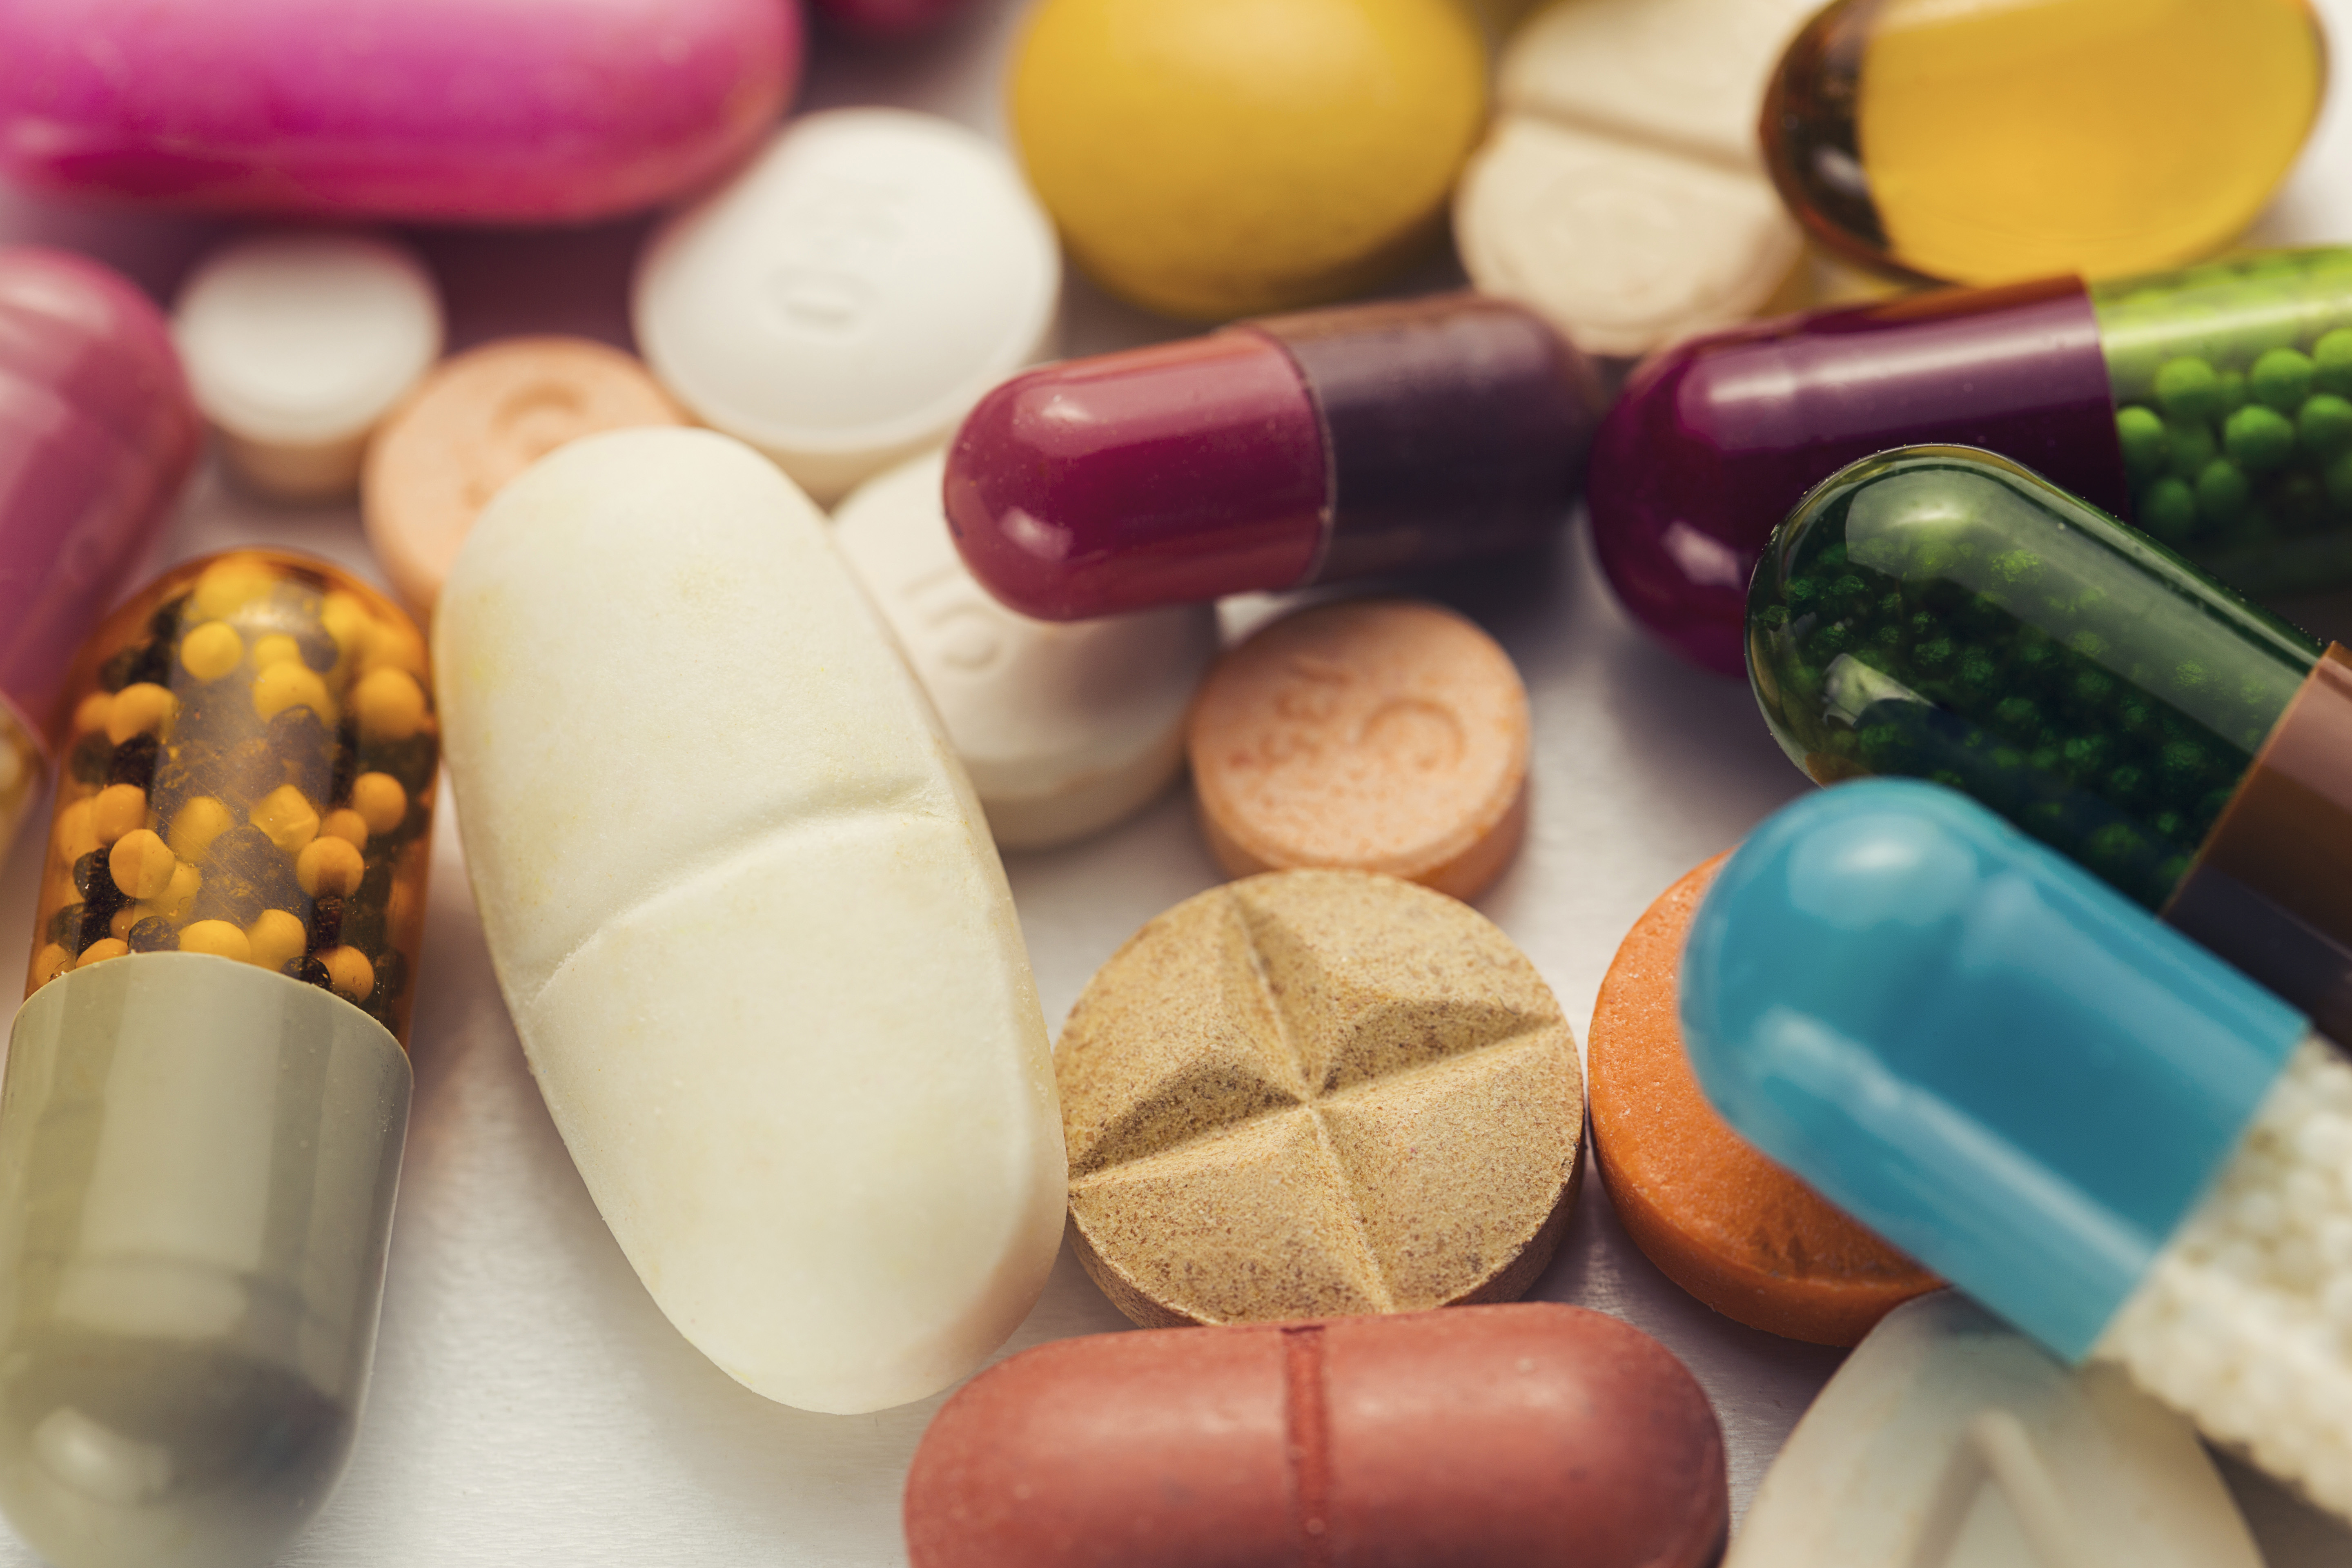 The current system where an overwhelmed FDA tries to fit in oversight of dietary supplements has to change, in order to protect consumers and put the onus on the manufacturer, says C. Michael White, professor of pharmacy practice. (Getty Images)